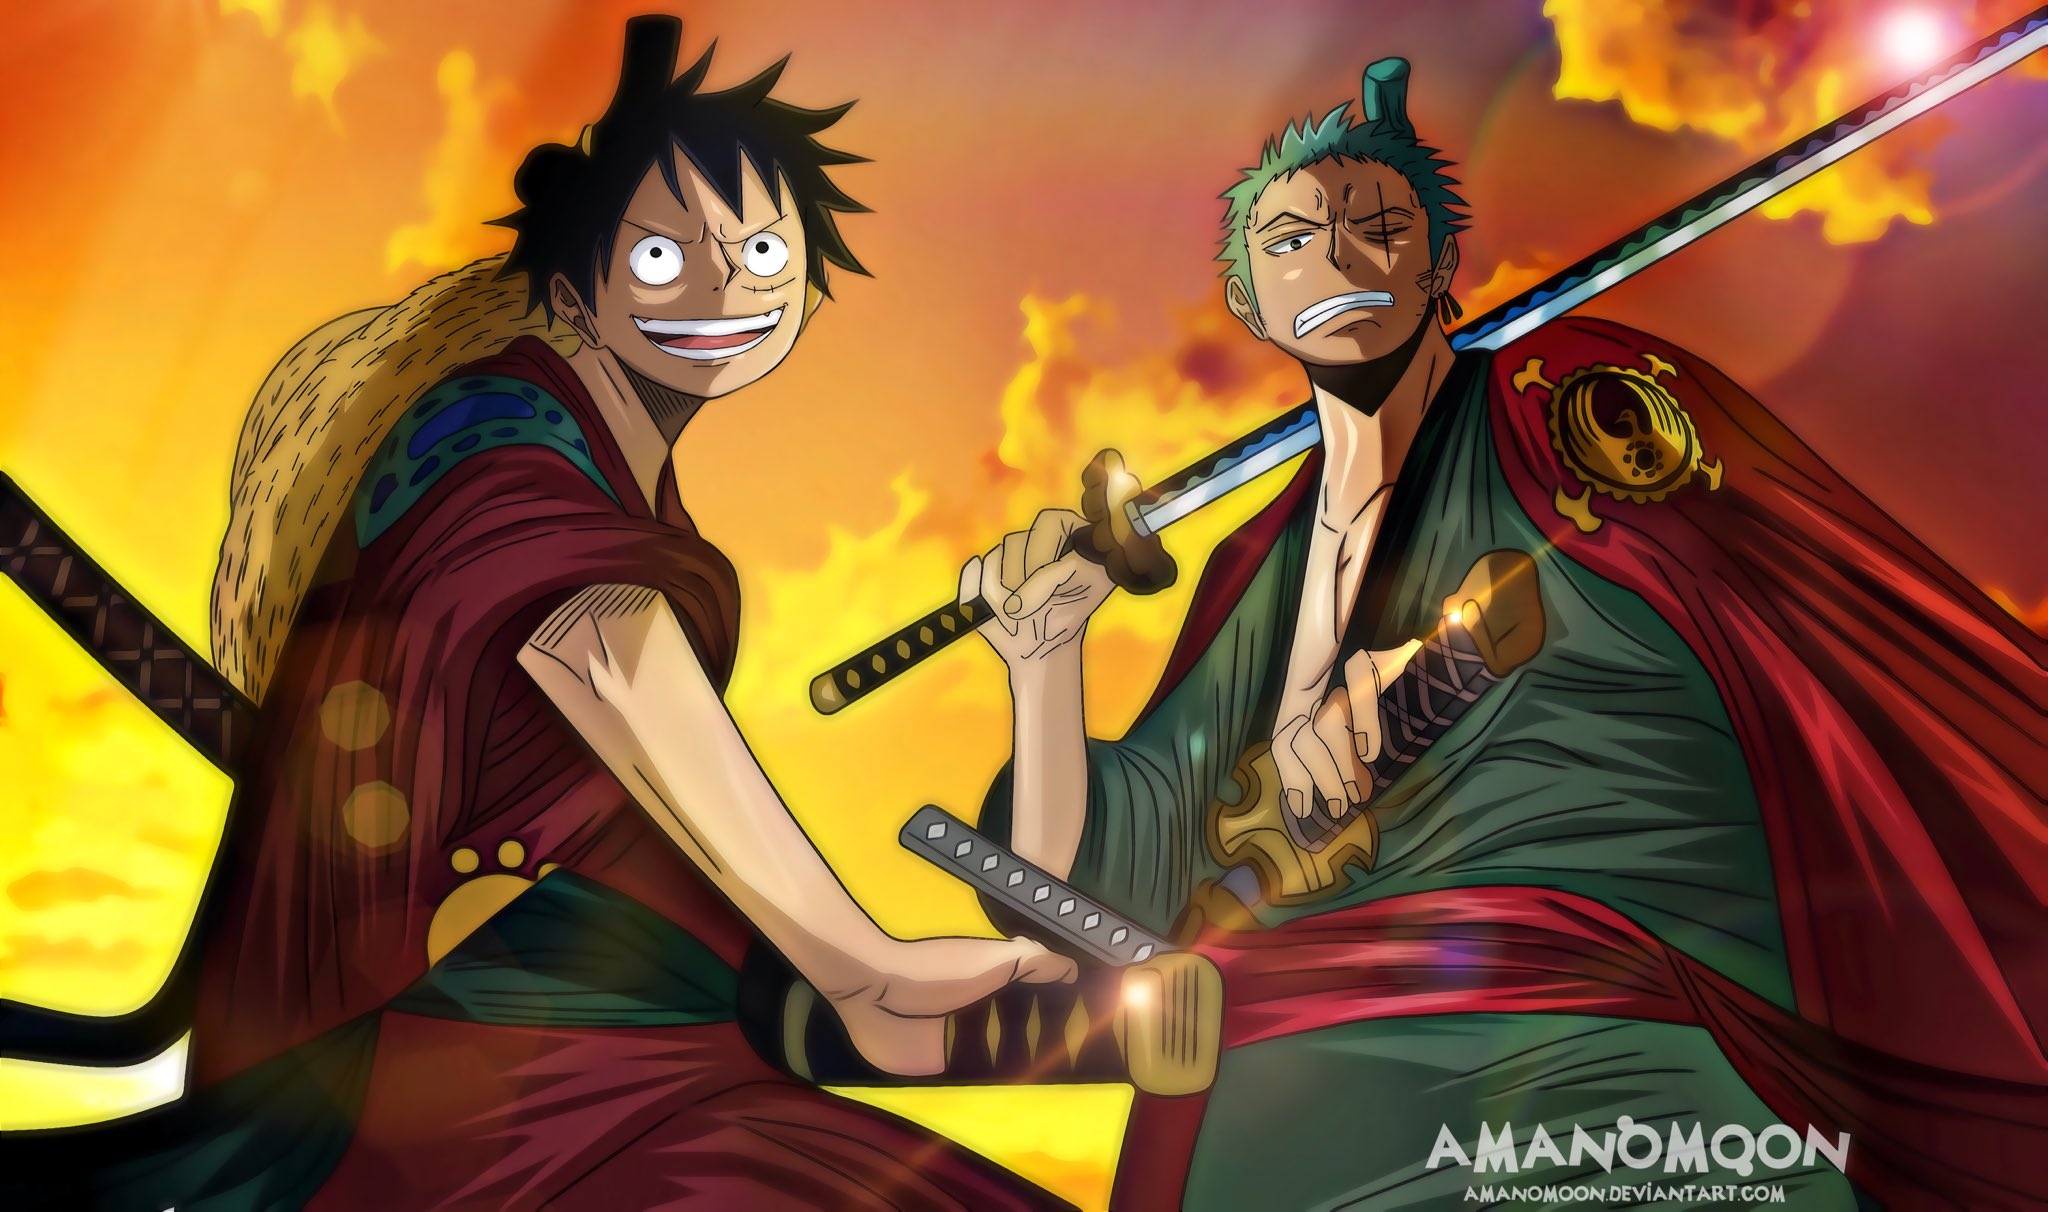 𝗣𝗔𝗡𝗗𝗔𝗠𝗔𝗡 ☄️ on Twitter: "#OnePiece 912 Zoro & Luffy are back ! #キャロット